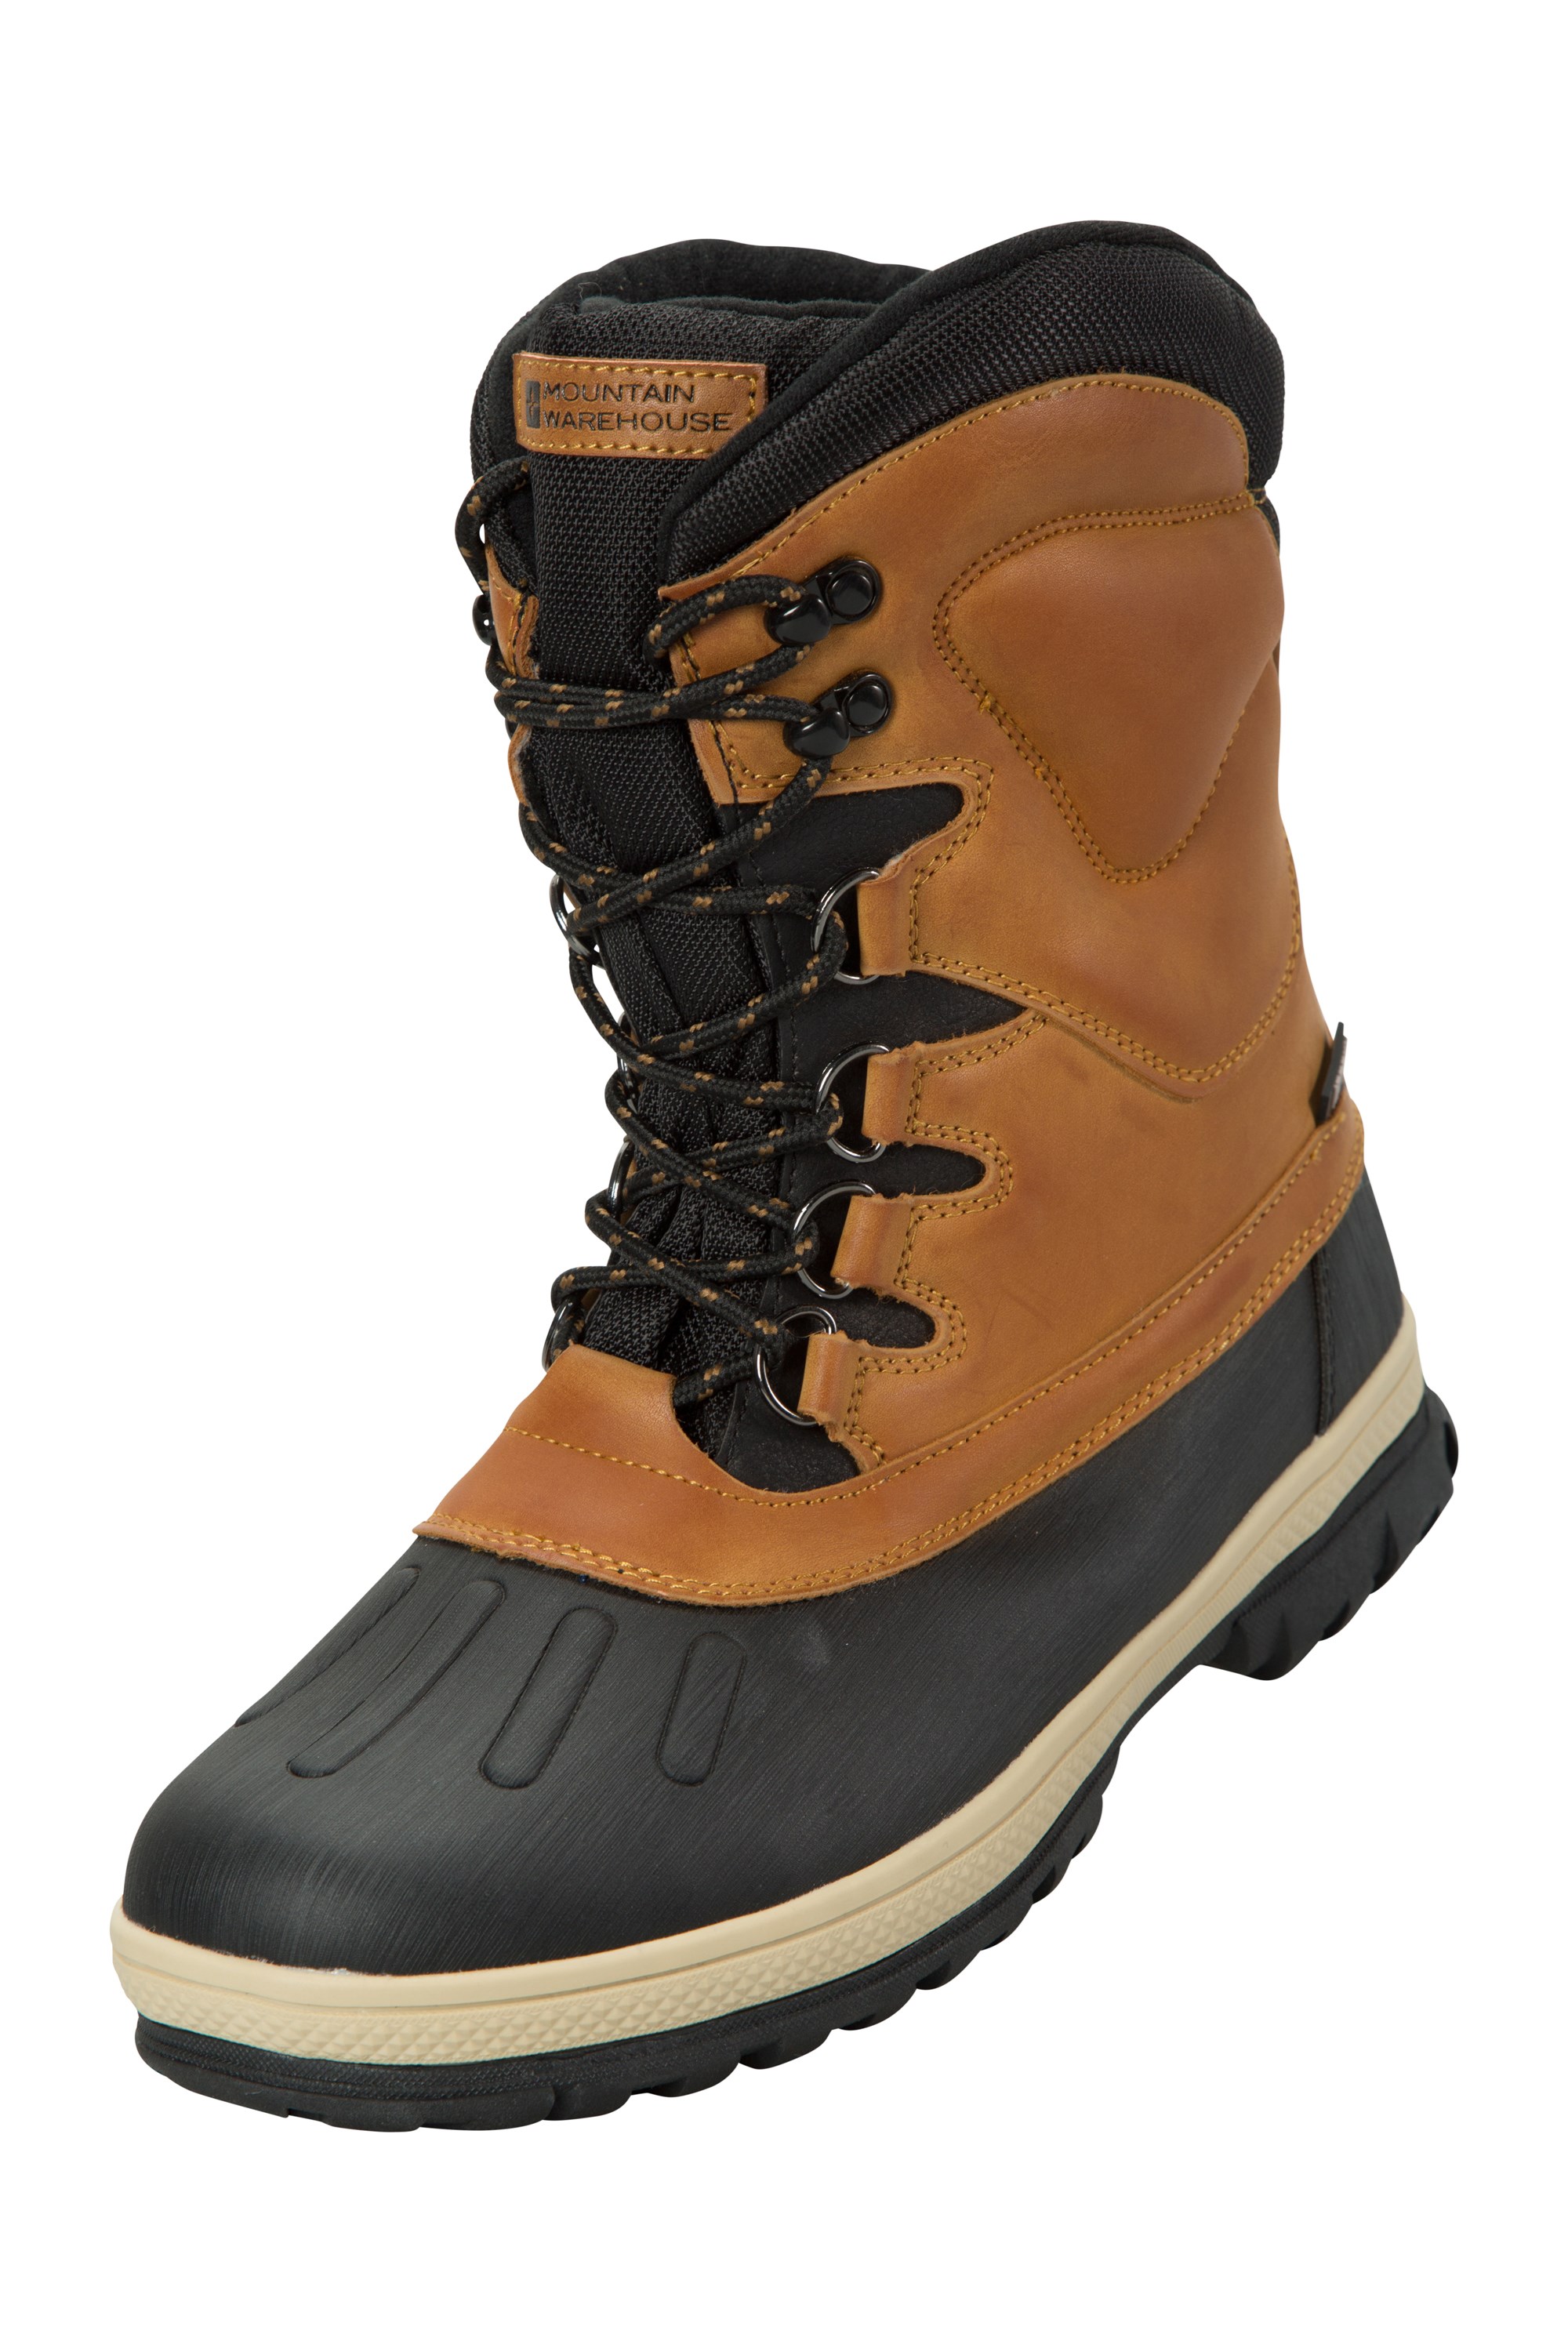 Arctic Thermal Mens Snow Boots | Mountain Warehouse US